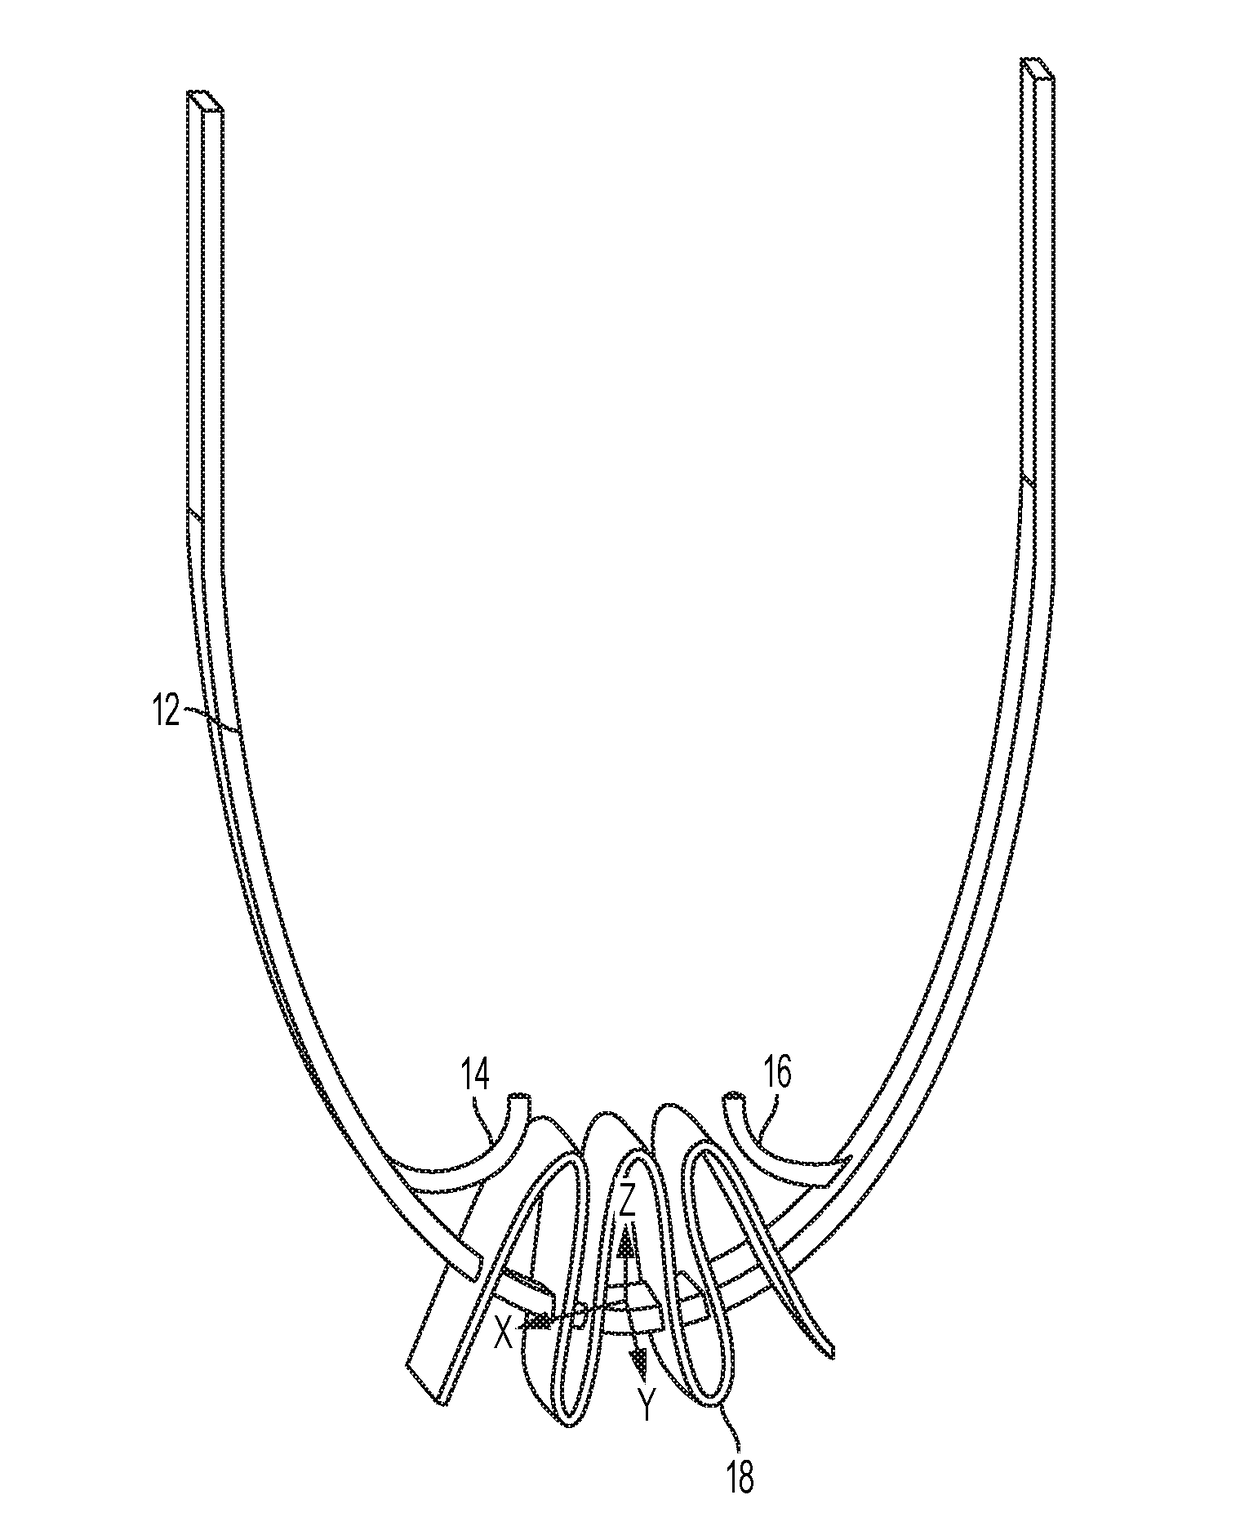 Suture tape construct for providing anchor with non-sliding suture tape